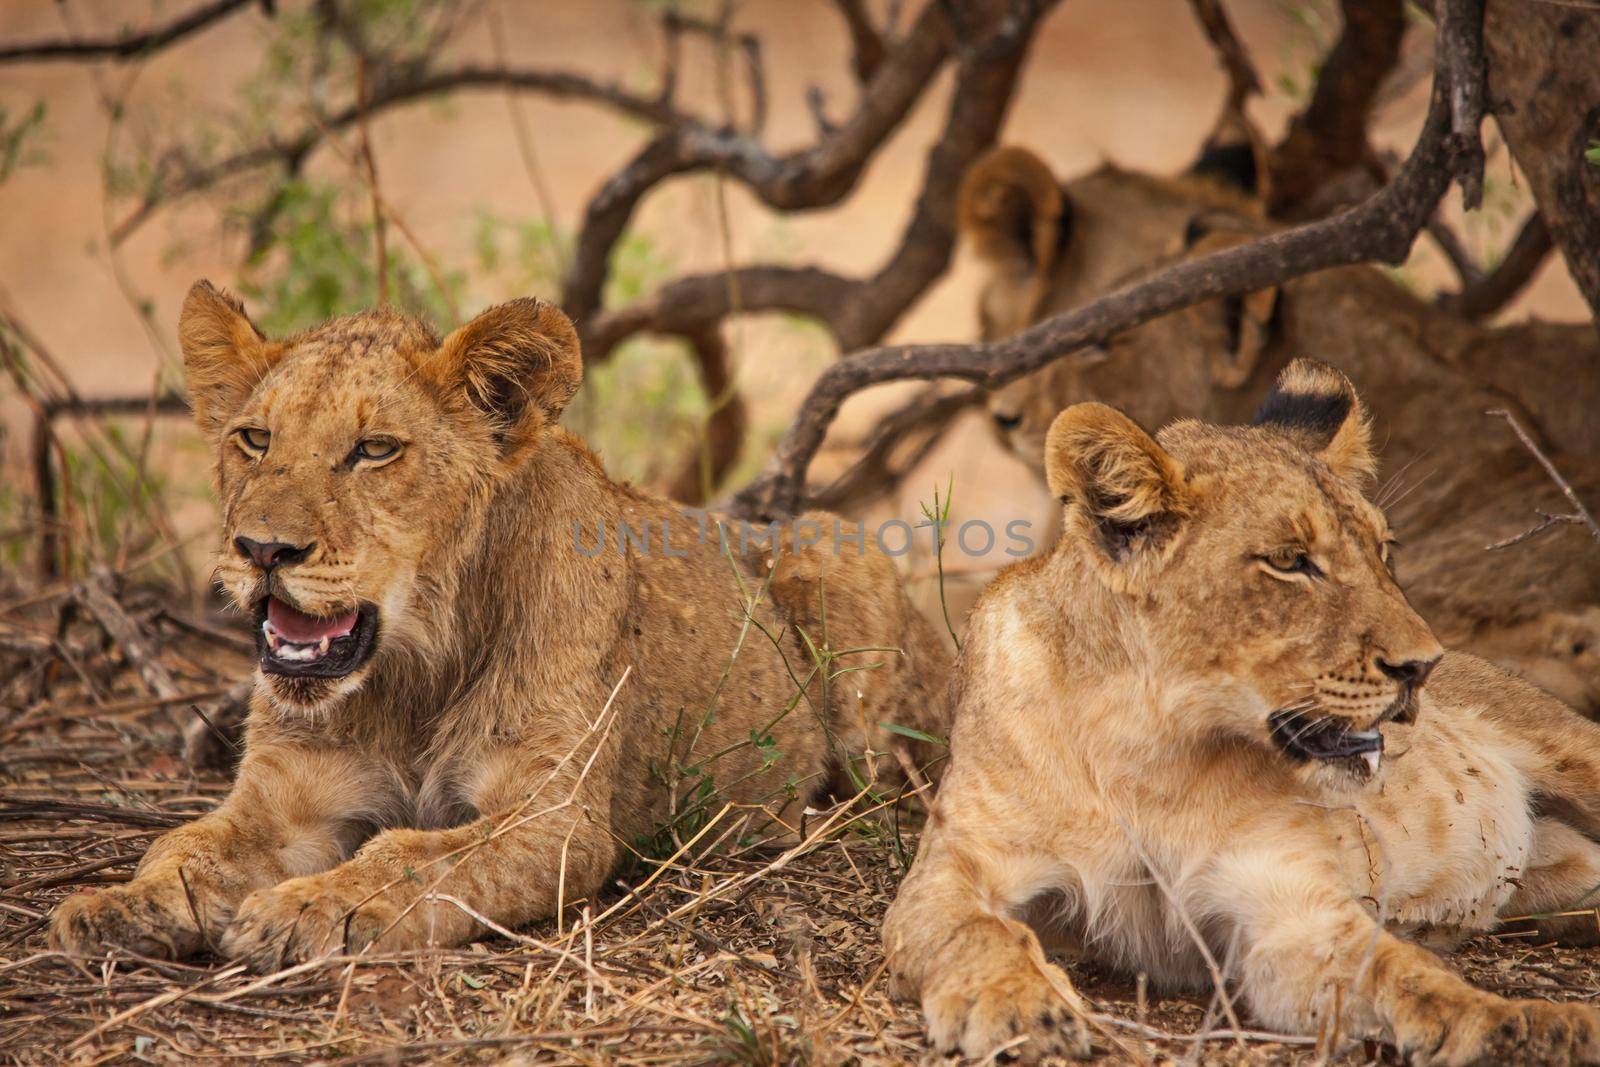 Sub-adult lions resting 14987 by kobus_peche